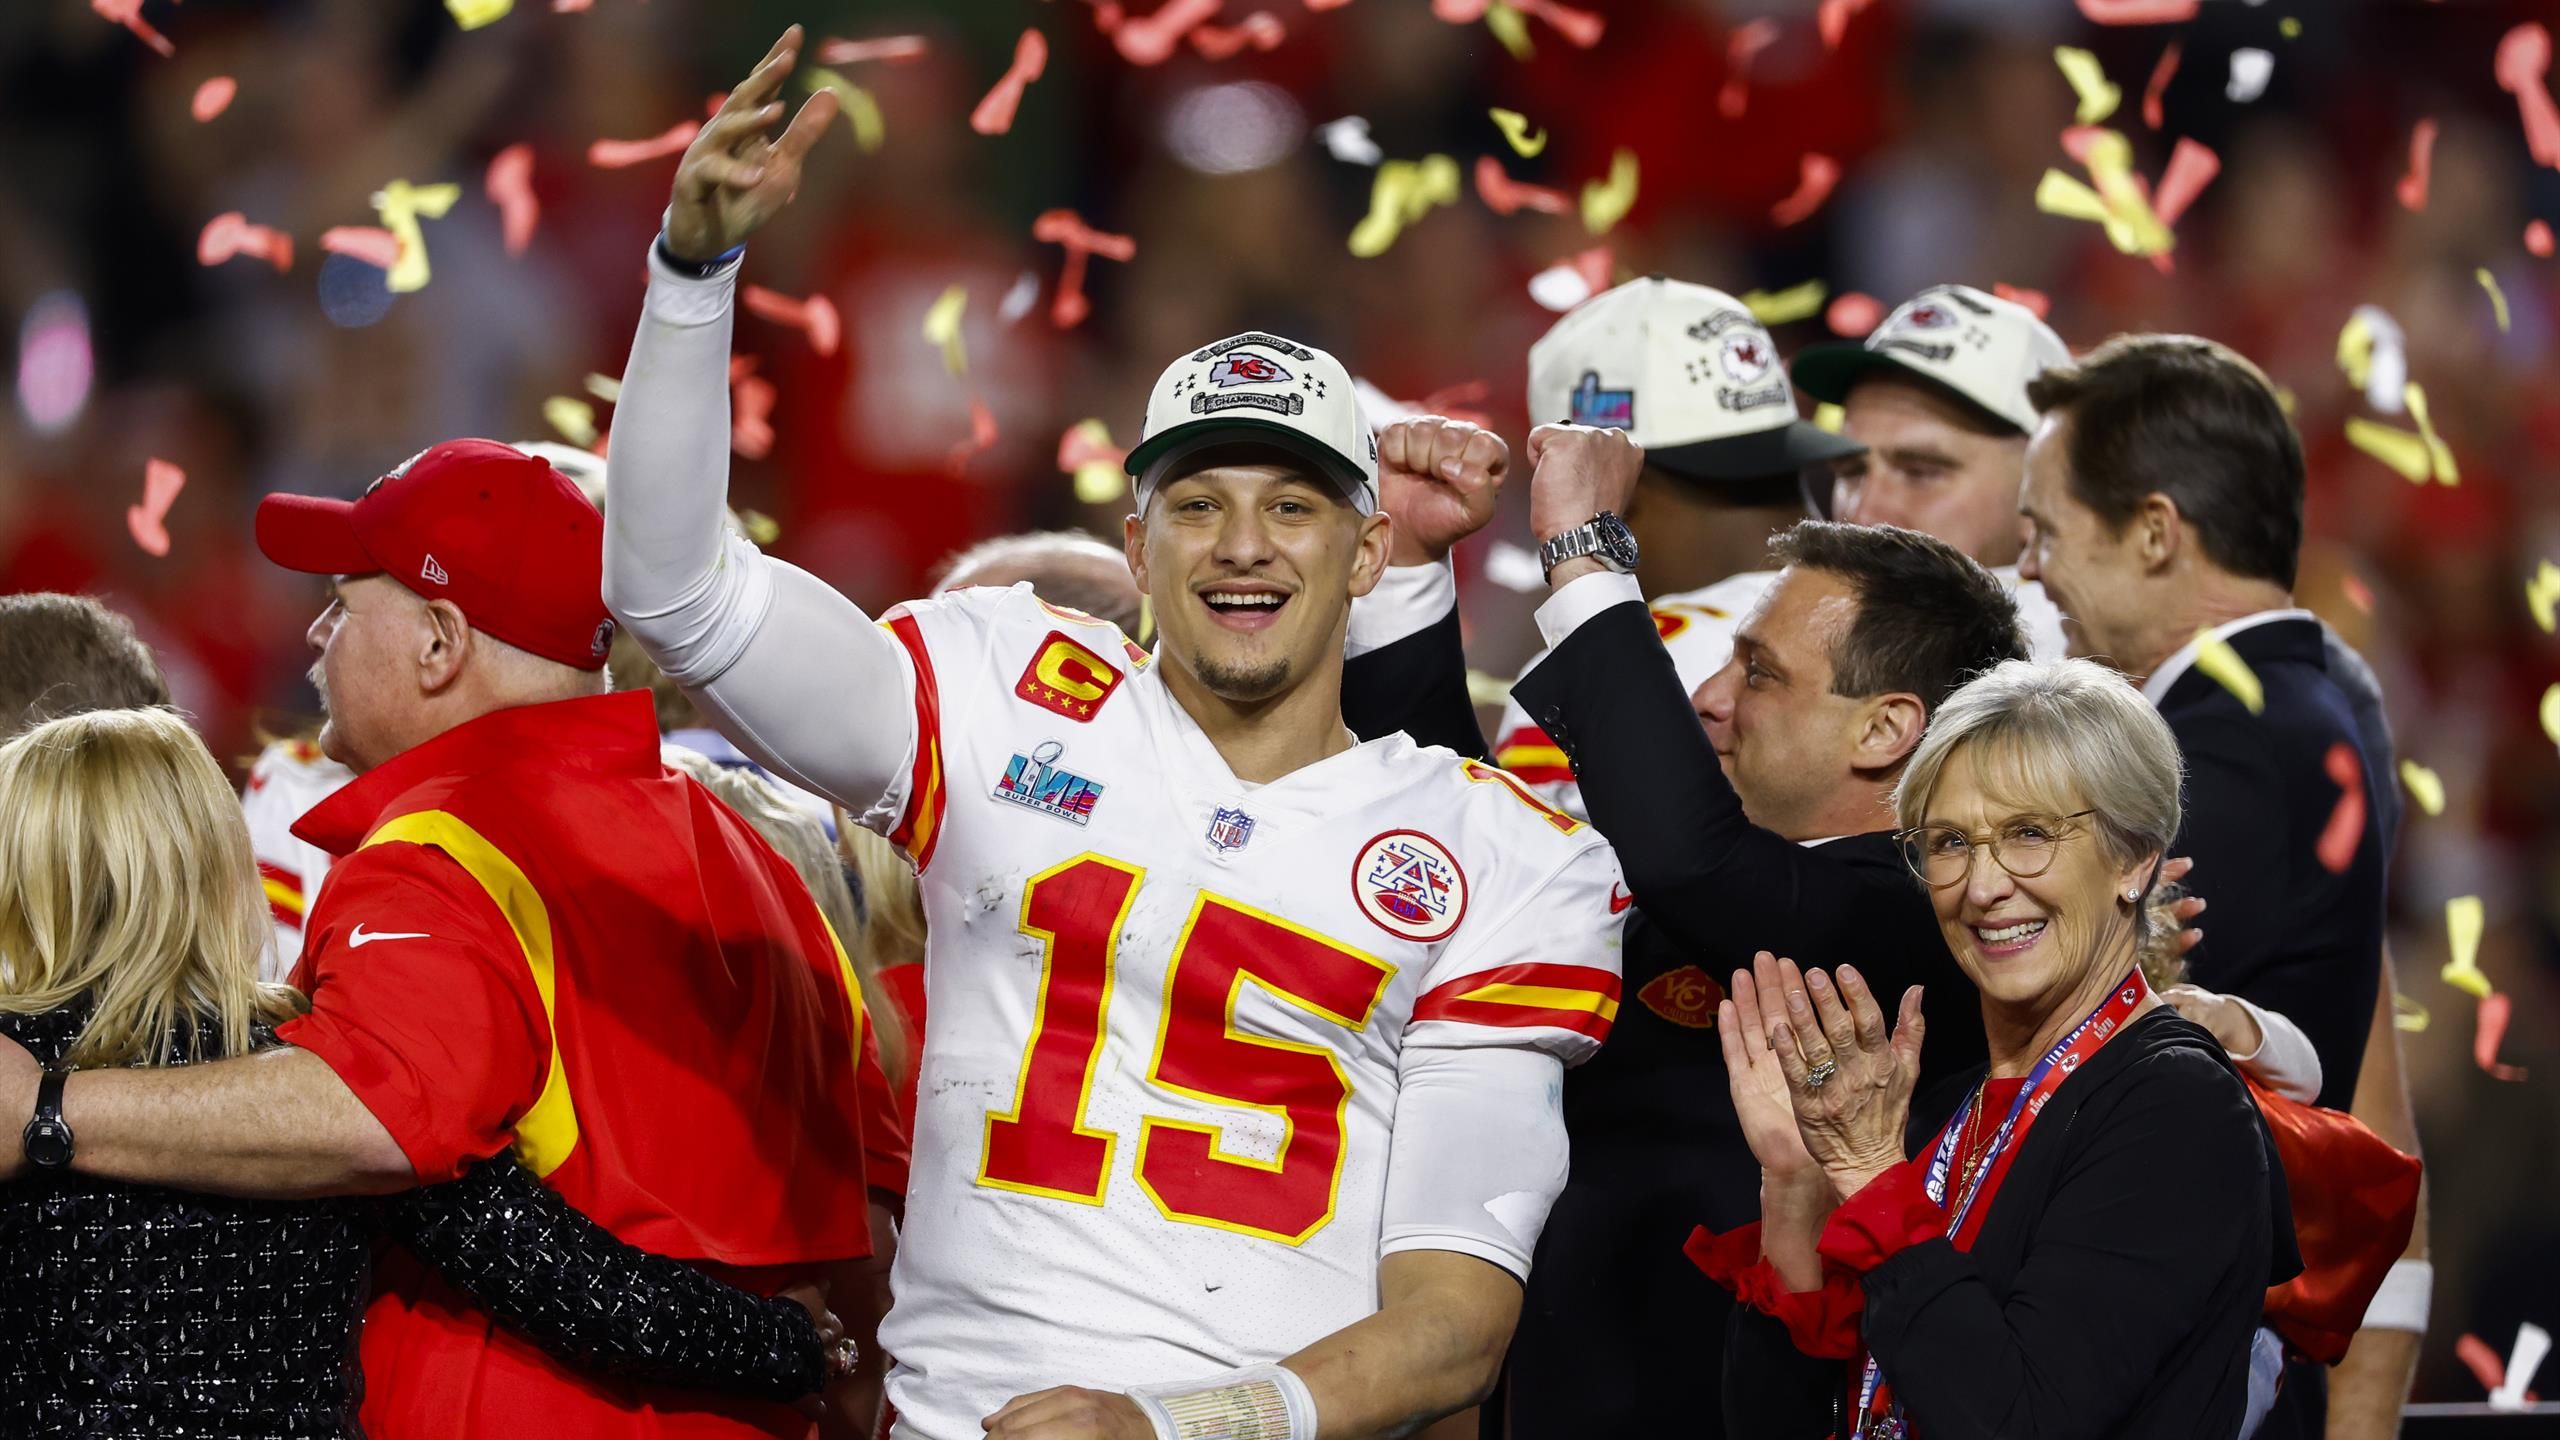 Patrick Mahomes leads Chiefs to thrilling victory over Eagles in